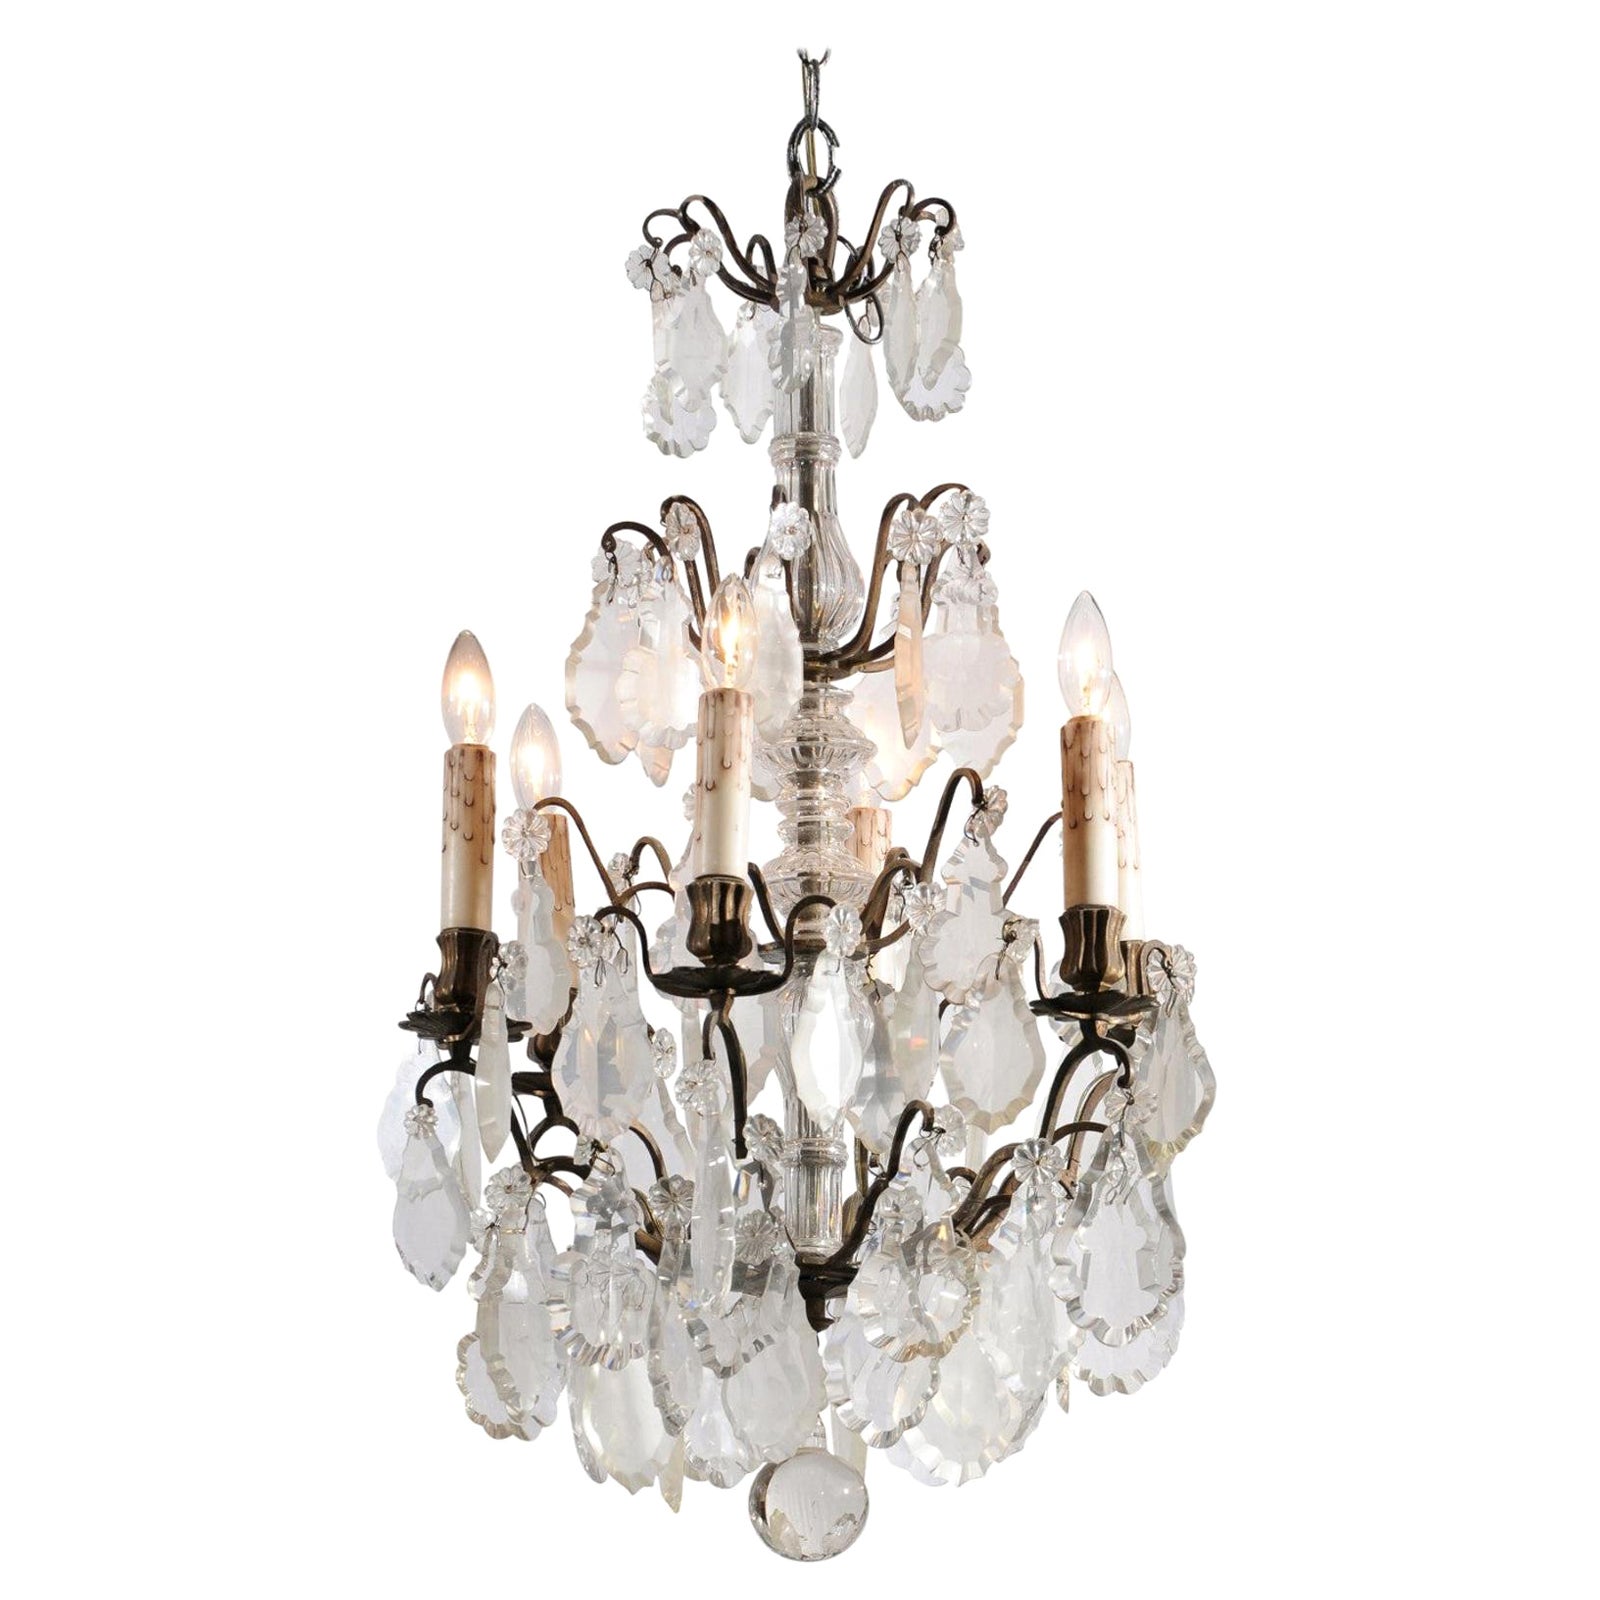 French 19th Century Six-Light Crystal Chandelier with Pendeloques and Rosettes For Sale